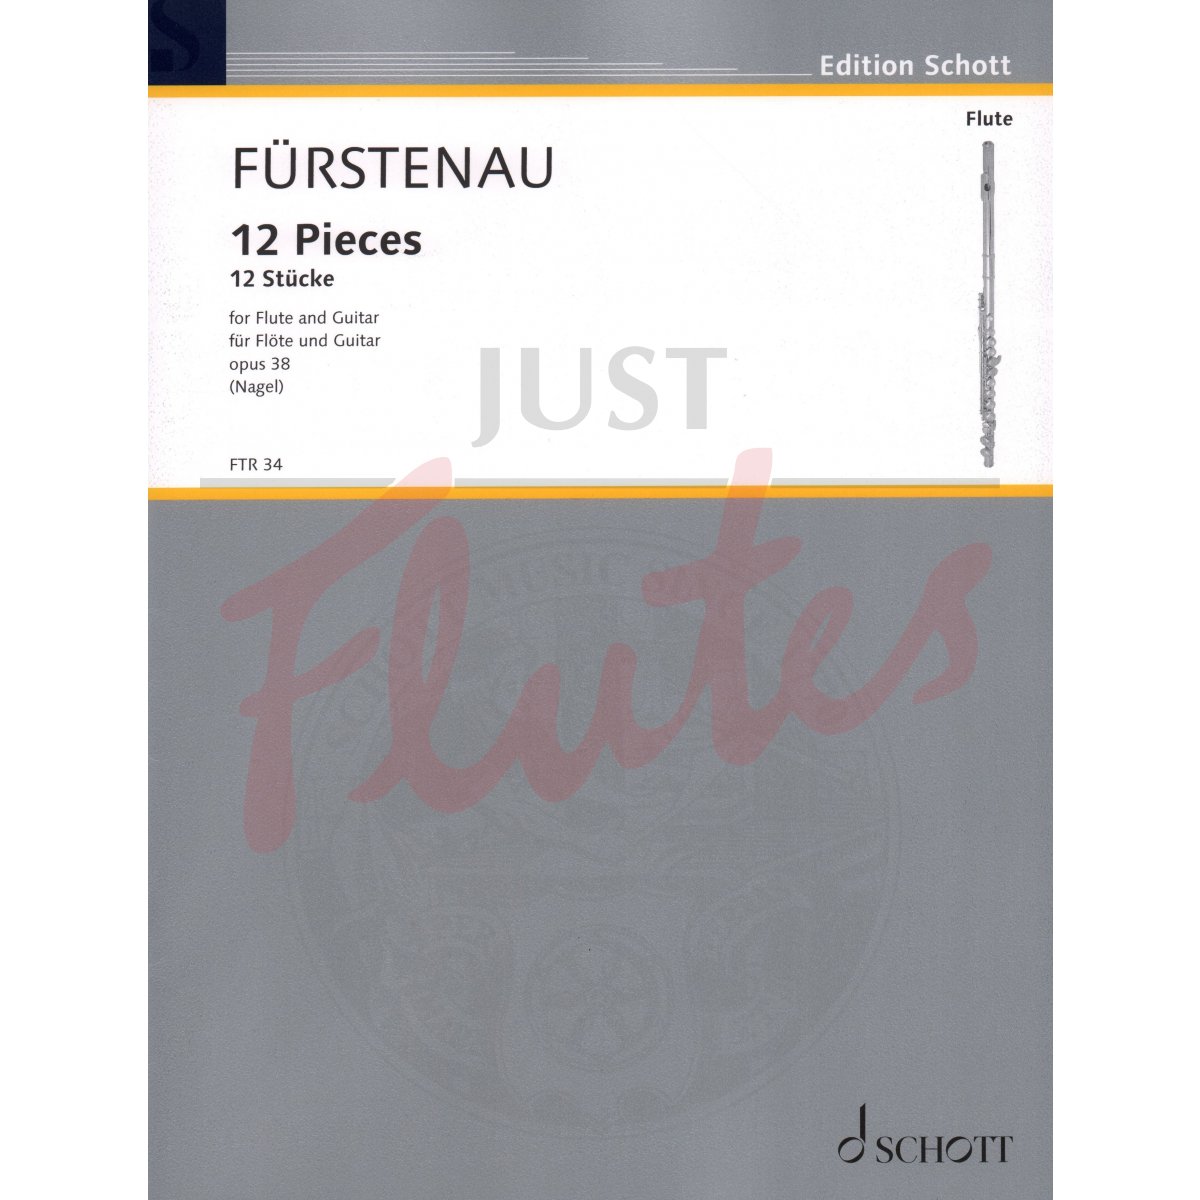 12 Pieces for Flute and Guitar